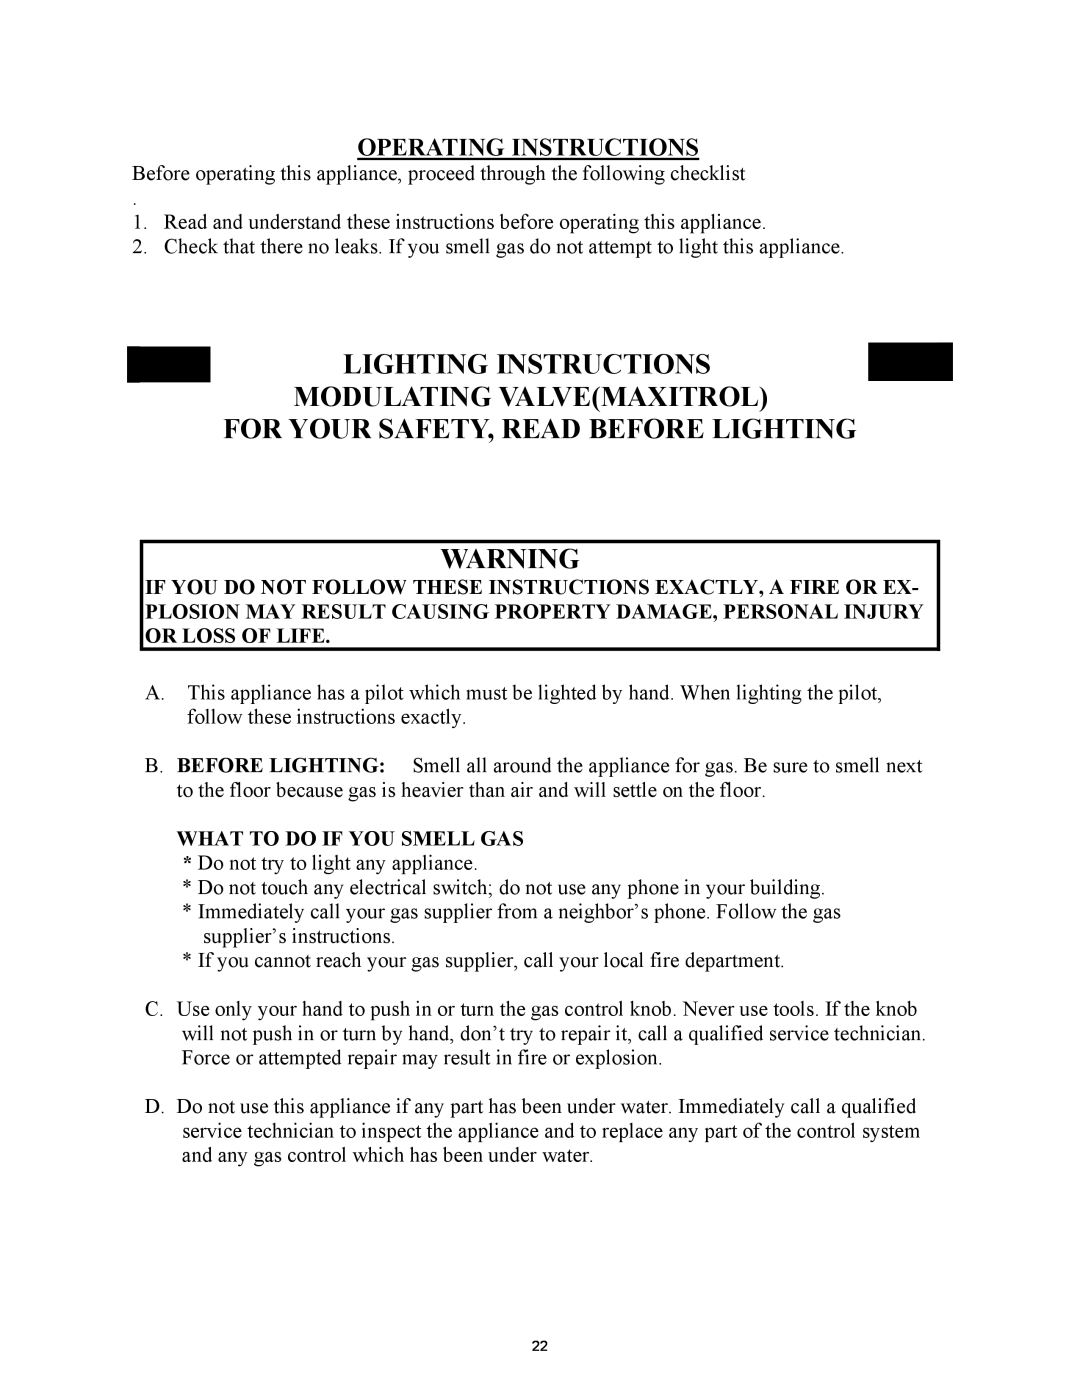 New Buck Corporation 1127B manual Lighting Instructions Modulating Valvemaxitrol, For Your Safety, Read Before Lighting 